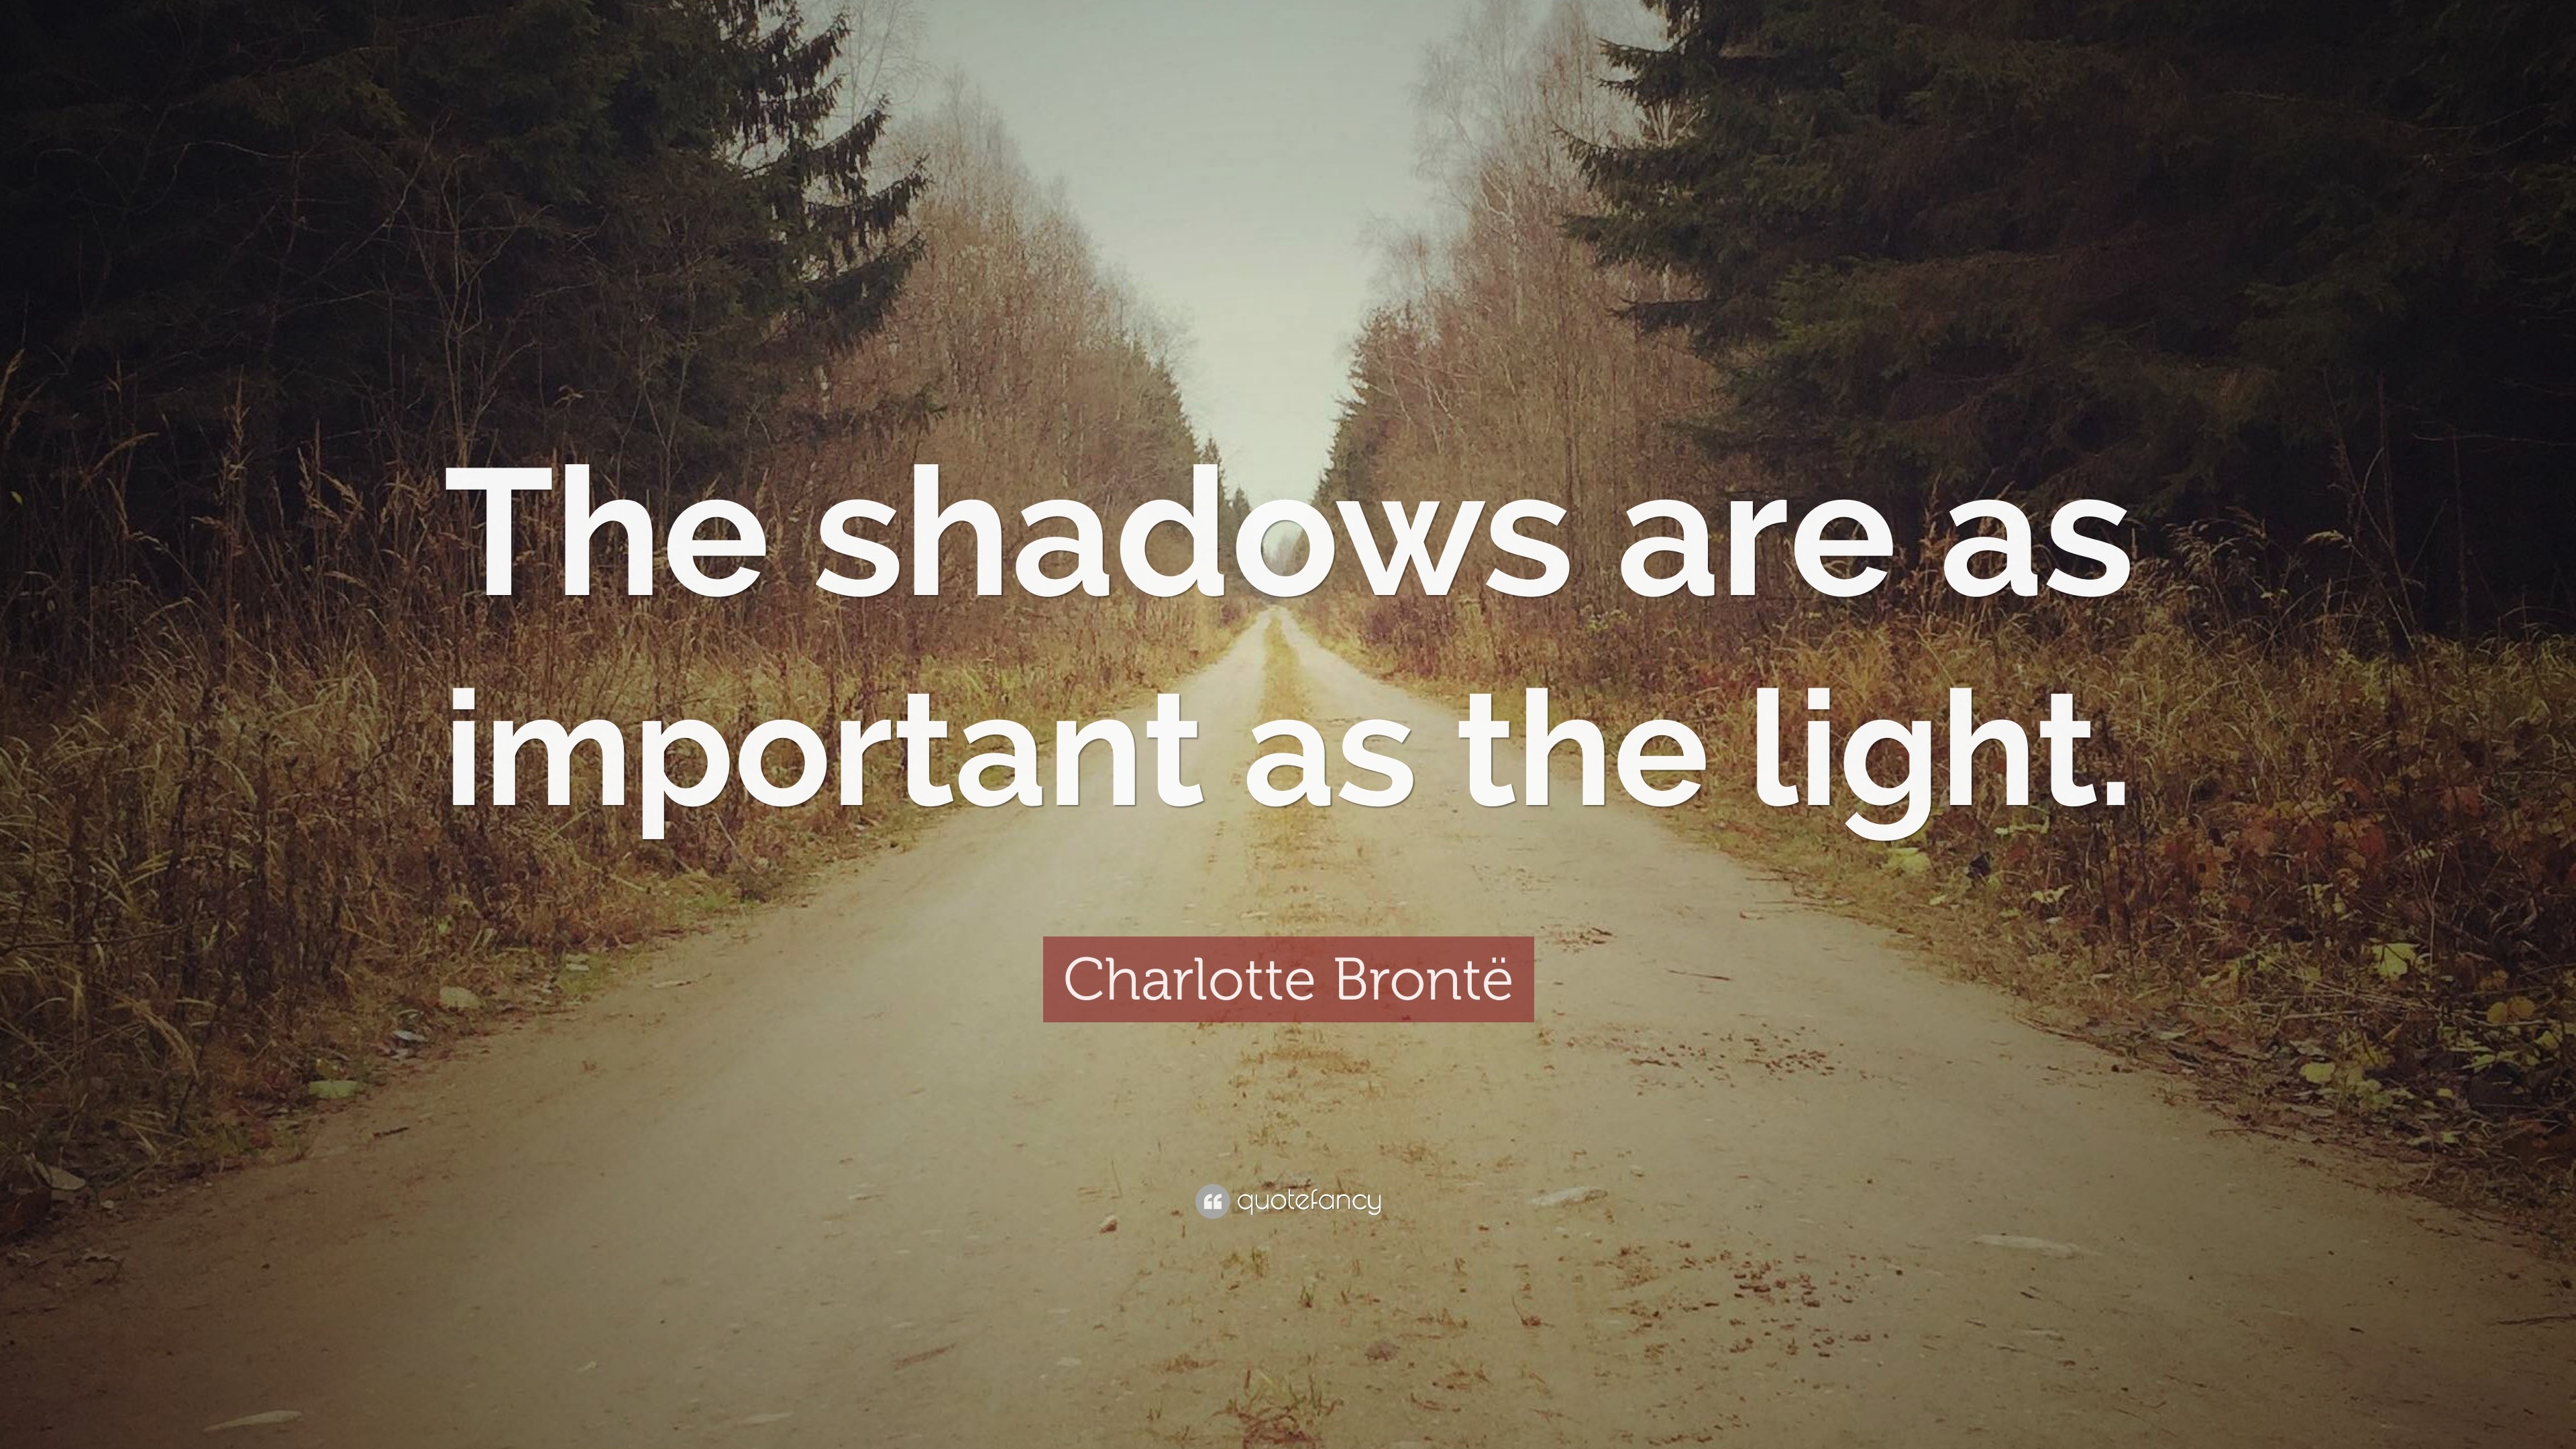 Charlotte Brontë Quote: “The shadows are as important as the light